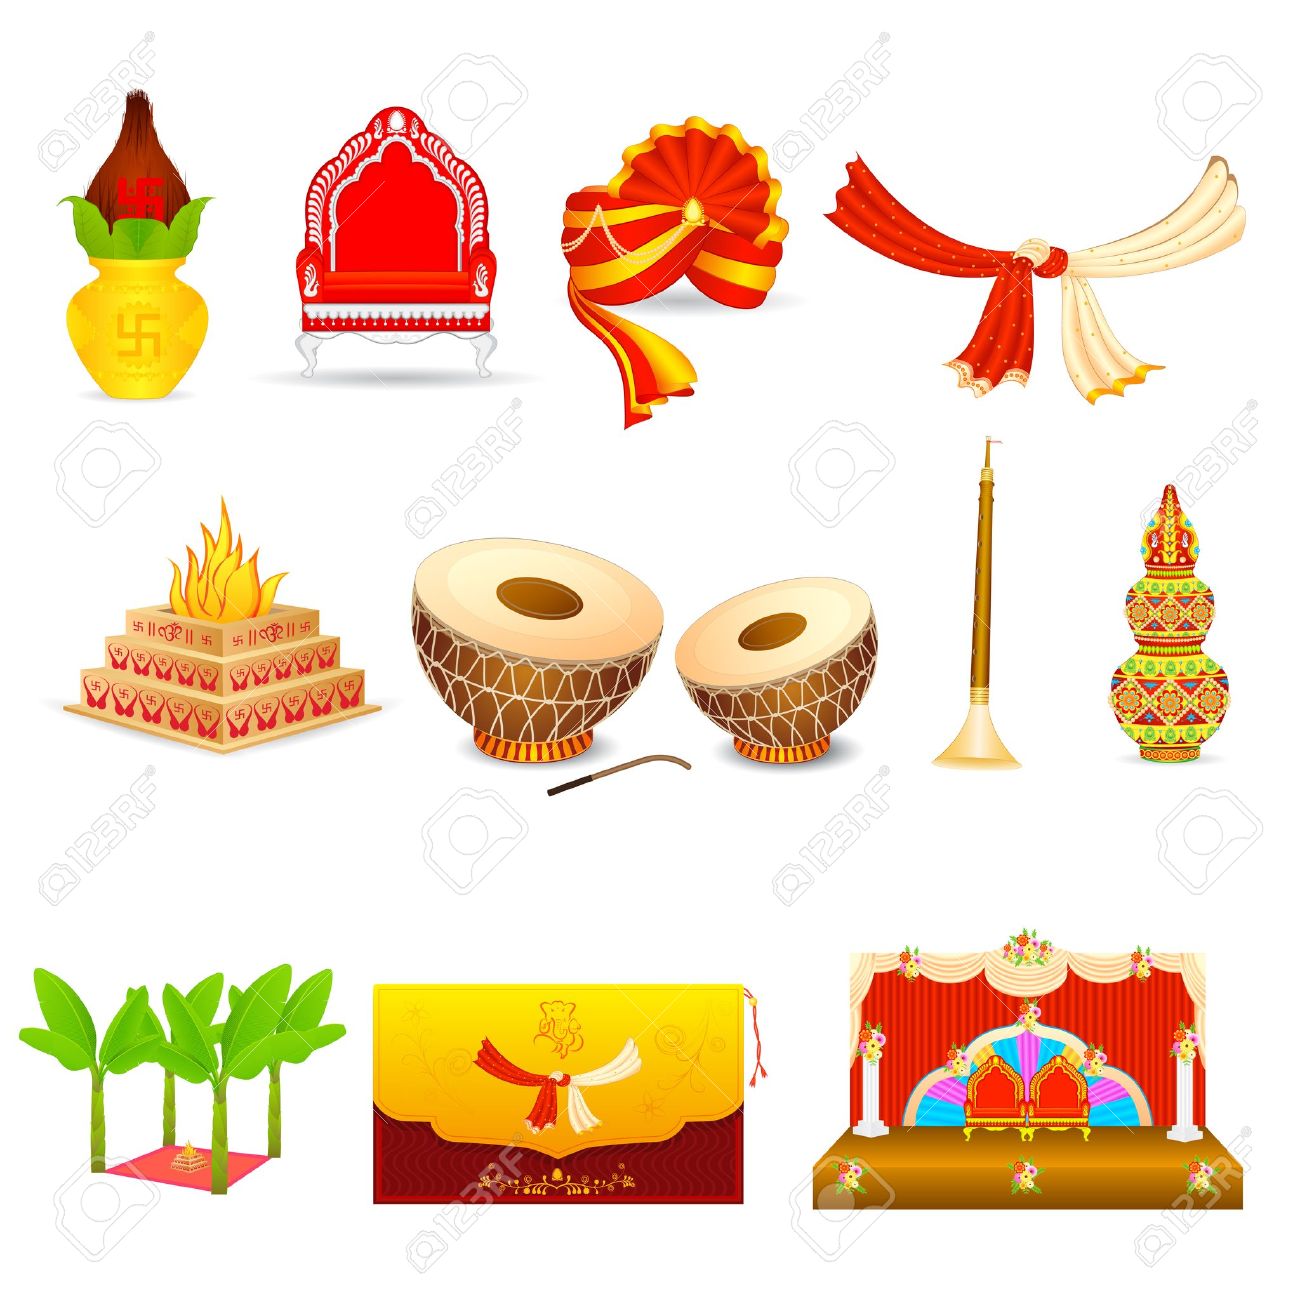 Indian Wedding Cliparts - Indian Wedding Vector, Transparent background PNG HD thumbnail